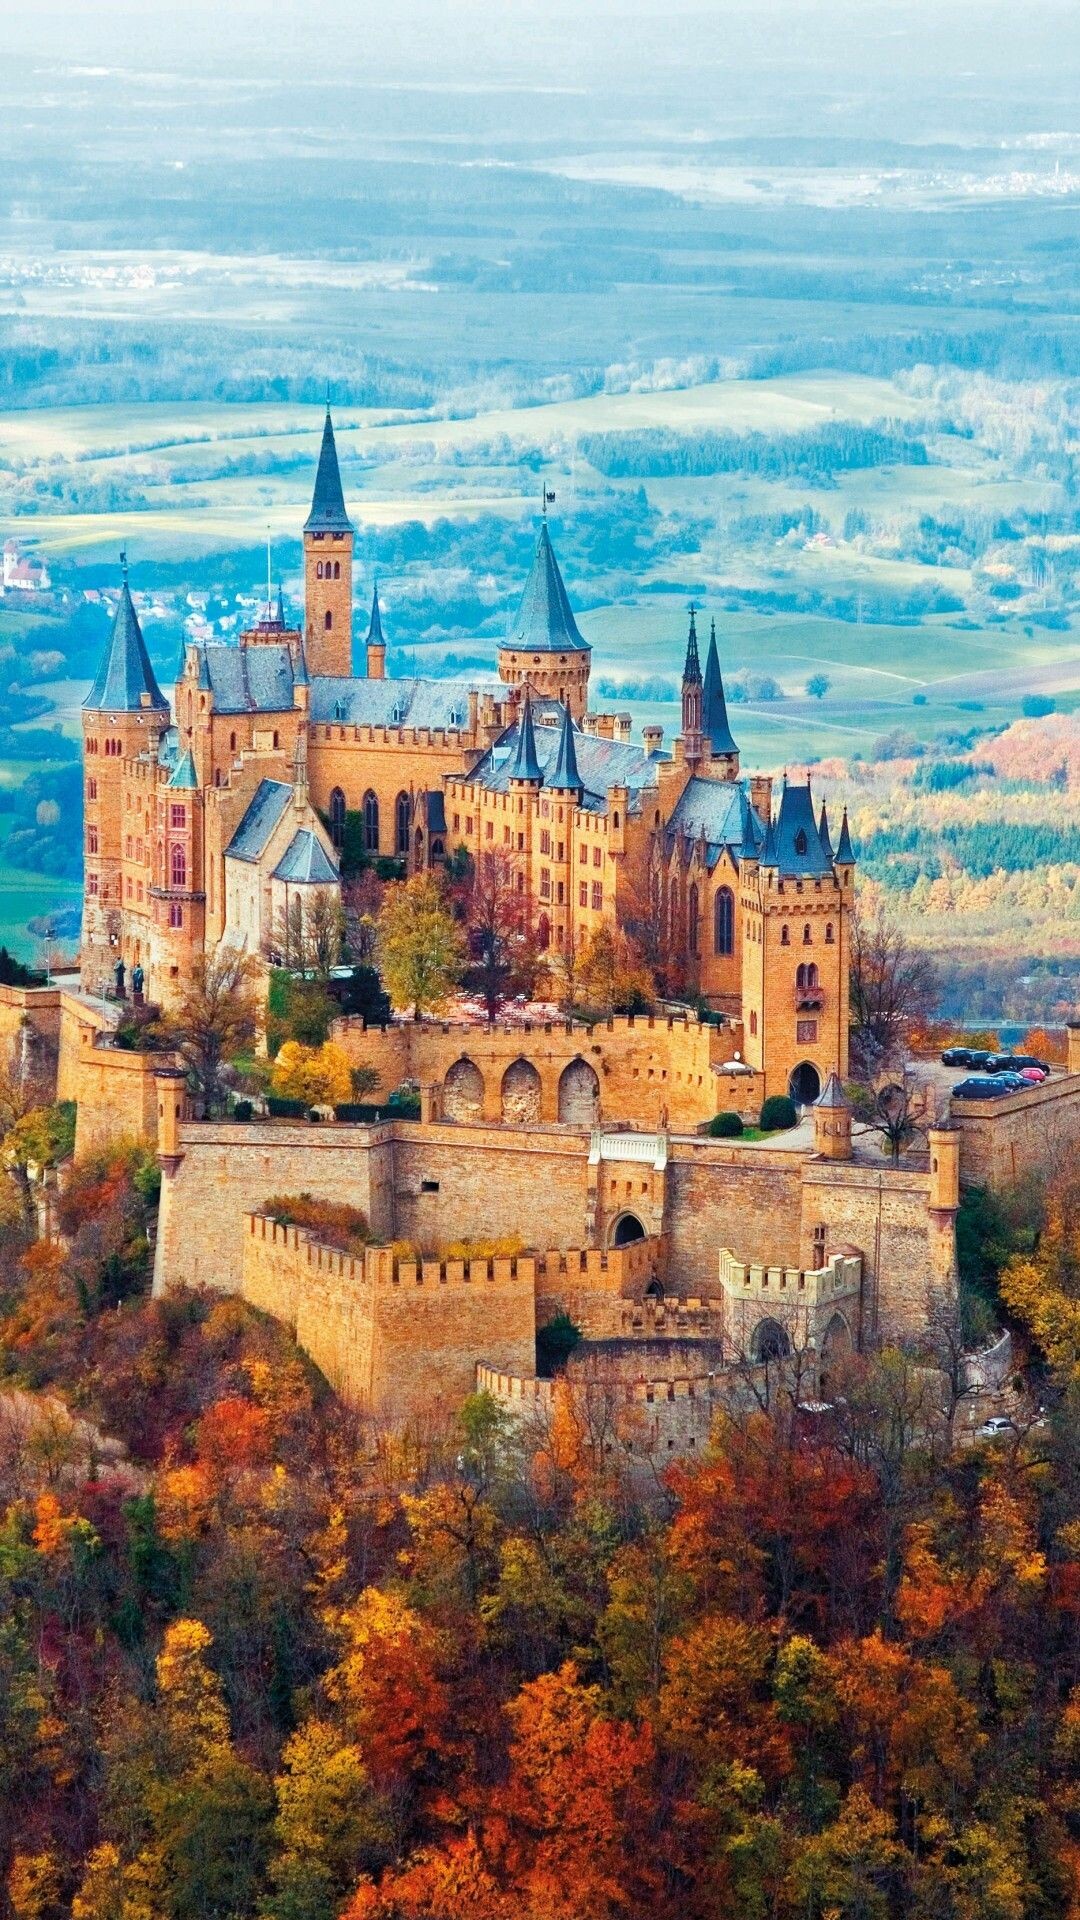 Germany: Hohenzollern Castle, located atop Mount Hohenzollern, above and south of Hechingen. 1080x1920 Full HD Wallpaper.